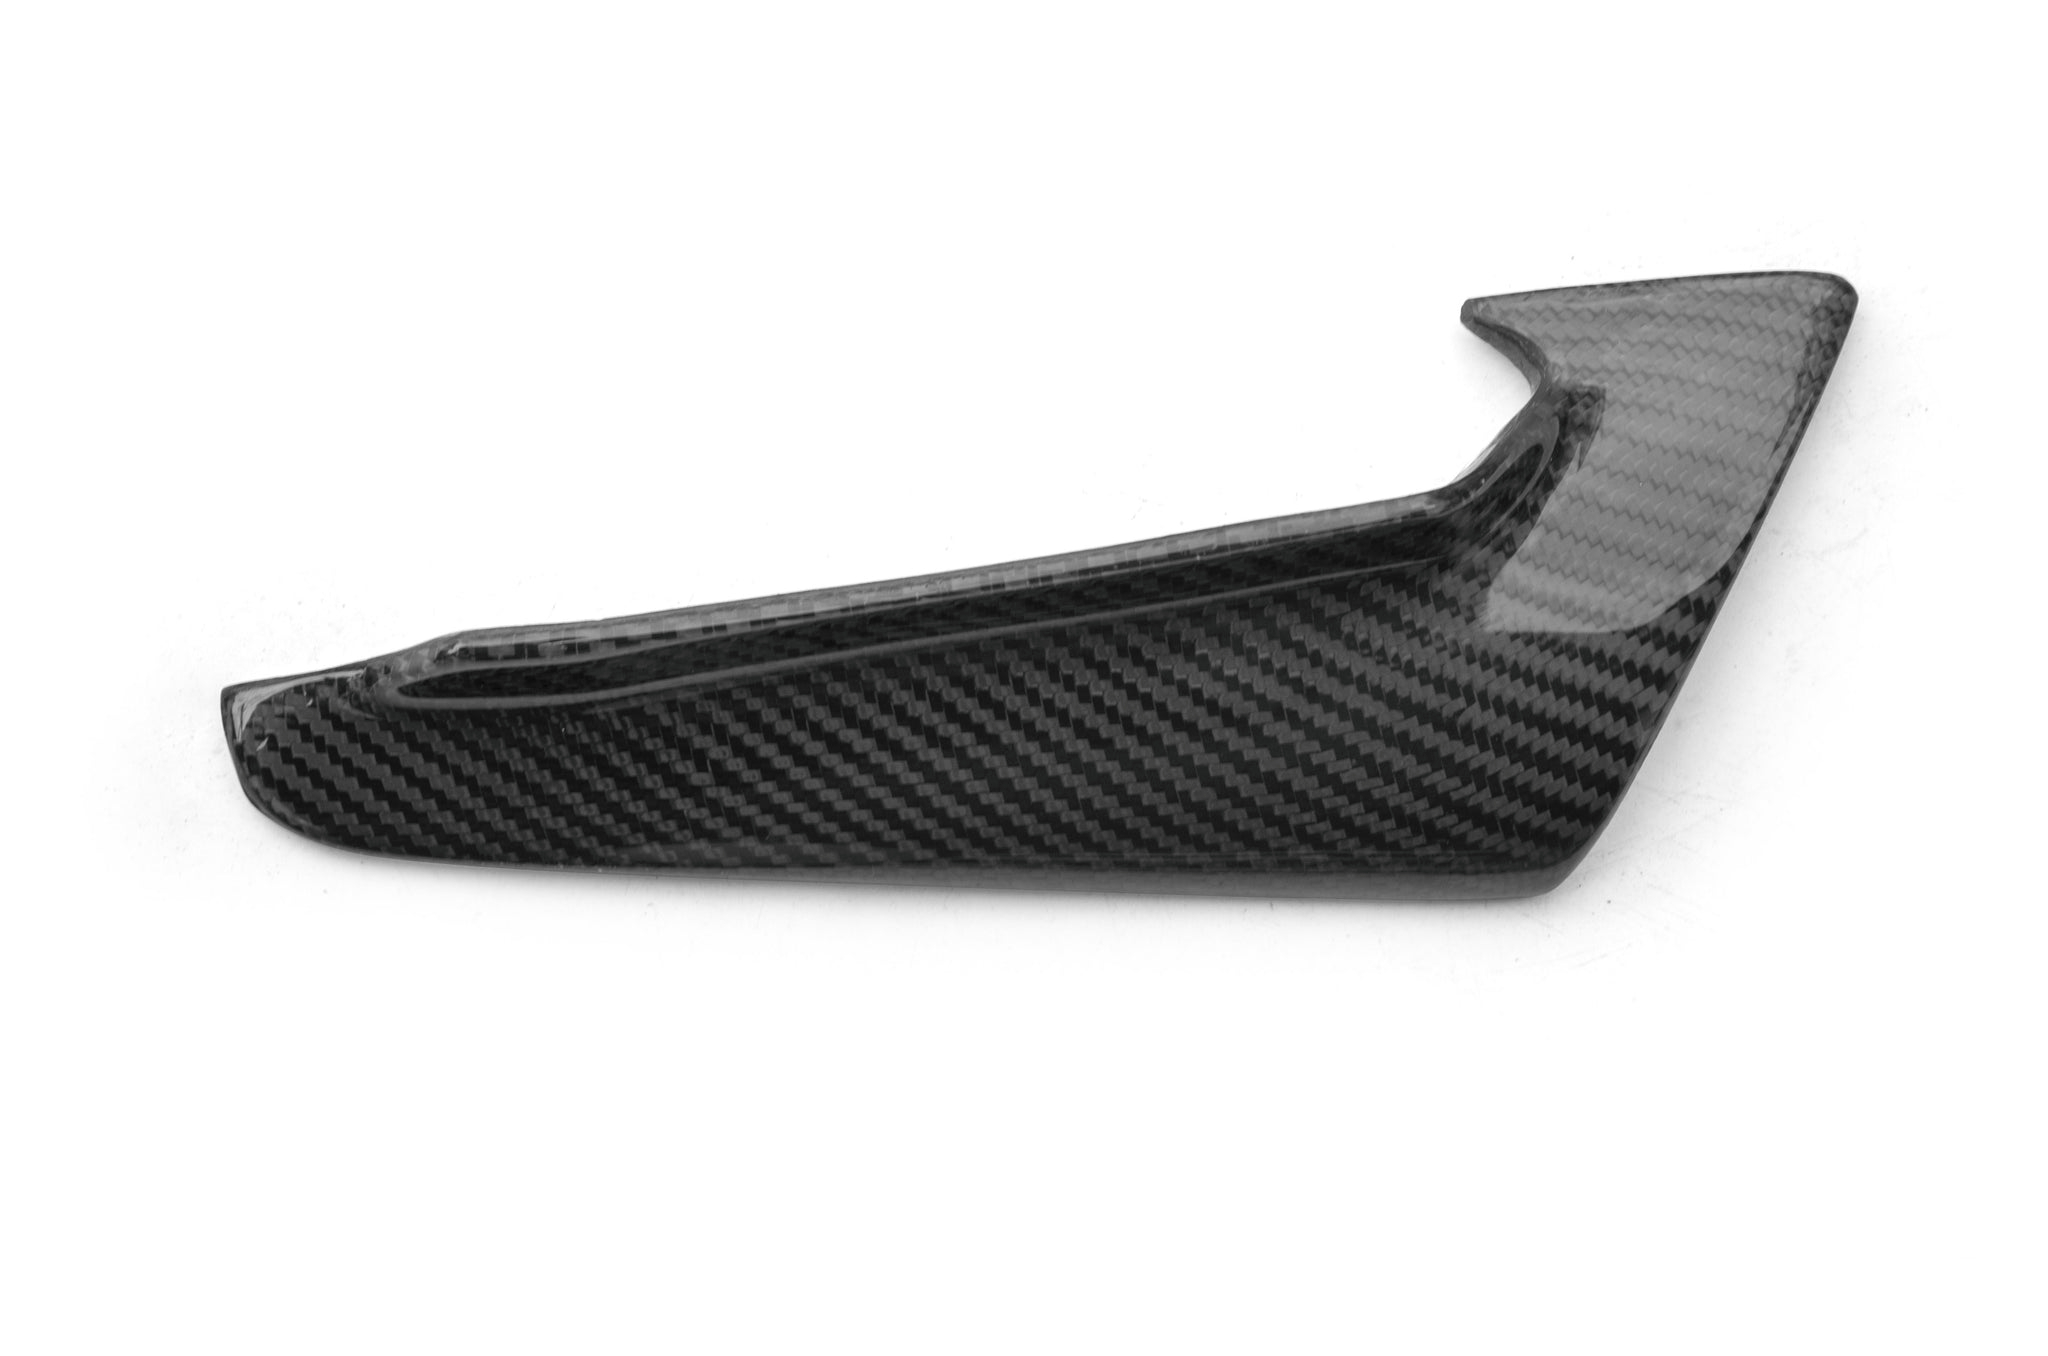 Check our price and buy CMST Carbon Fiber Body Kit set for Audi RS3!